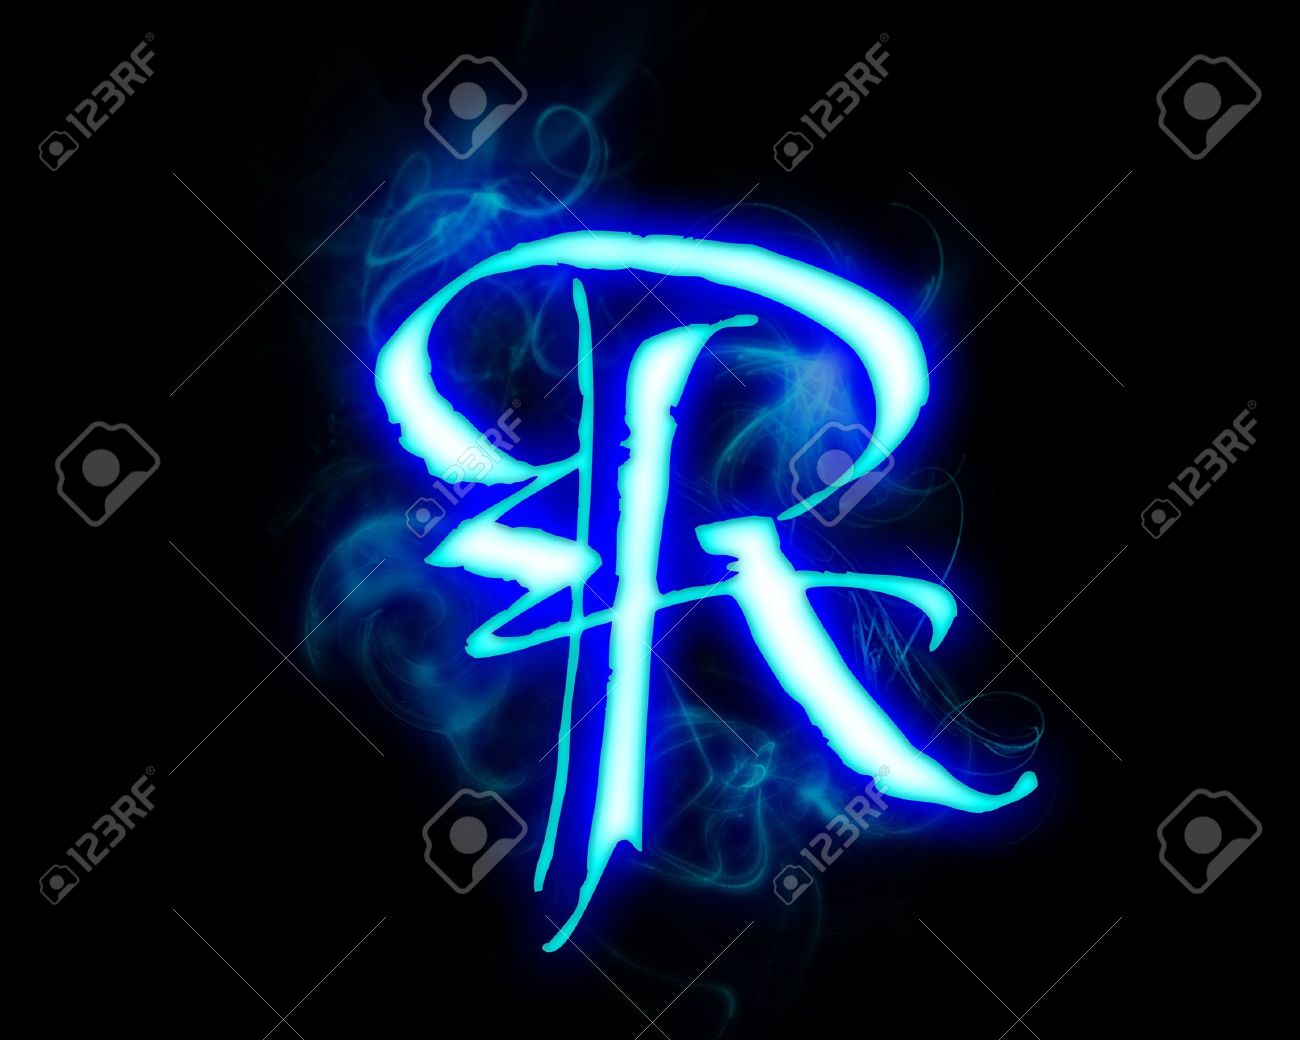 Blue Flame Magic Font Over Black Background Letter R Stock Photo